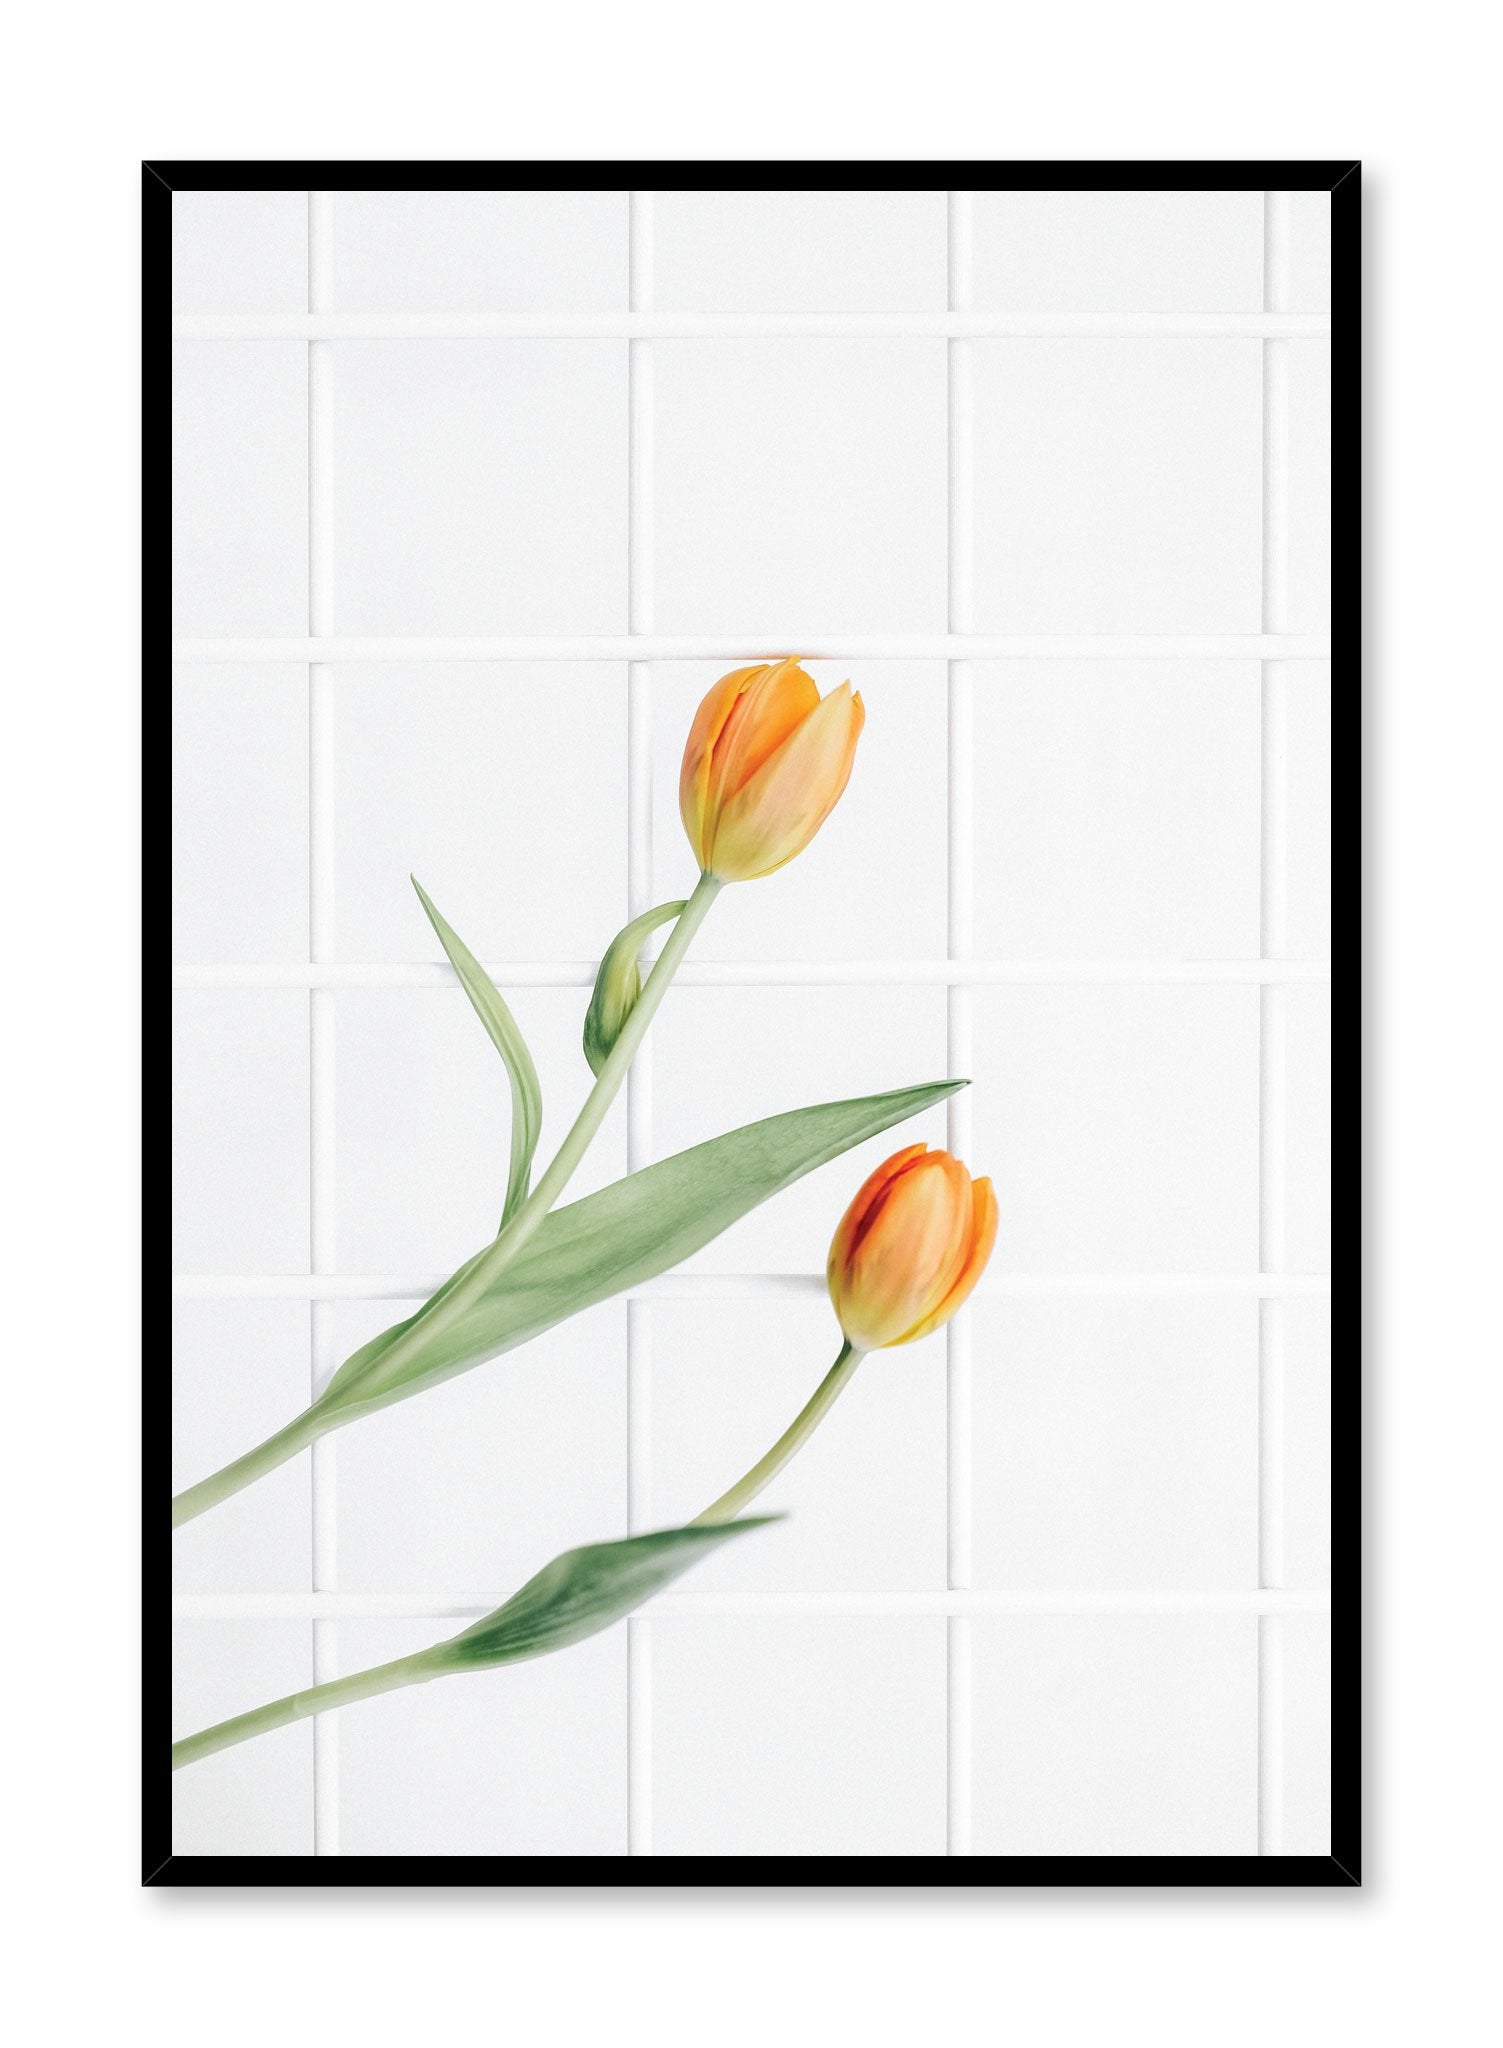 Minimalist wall poster by Opposite Wall with Tulips in Arabesque floral photography